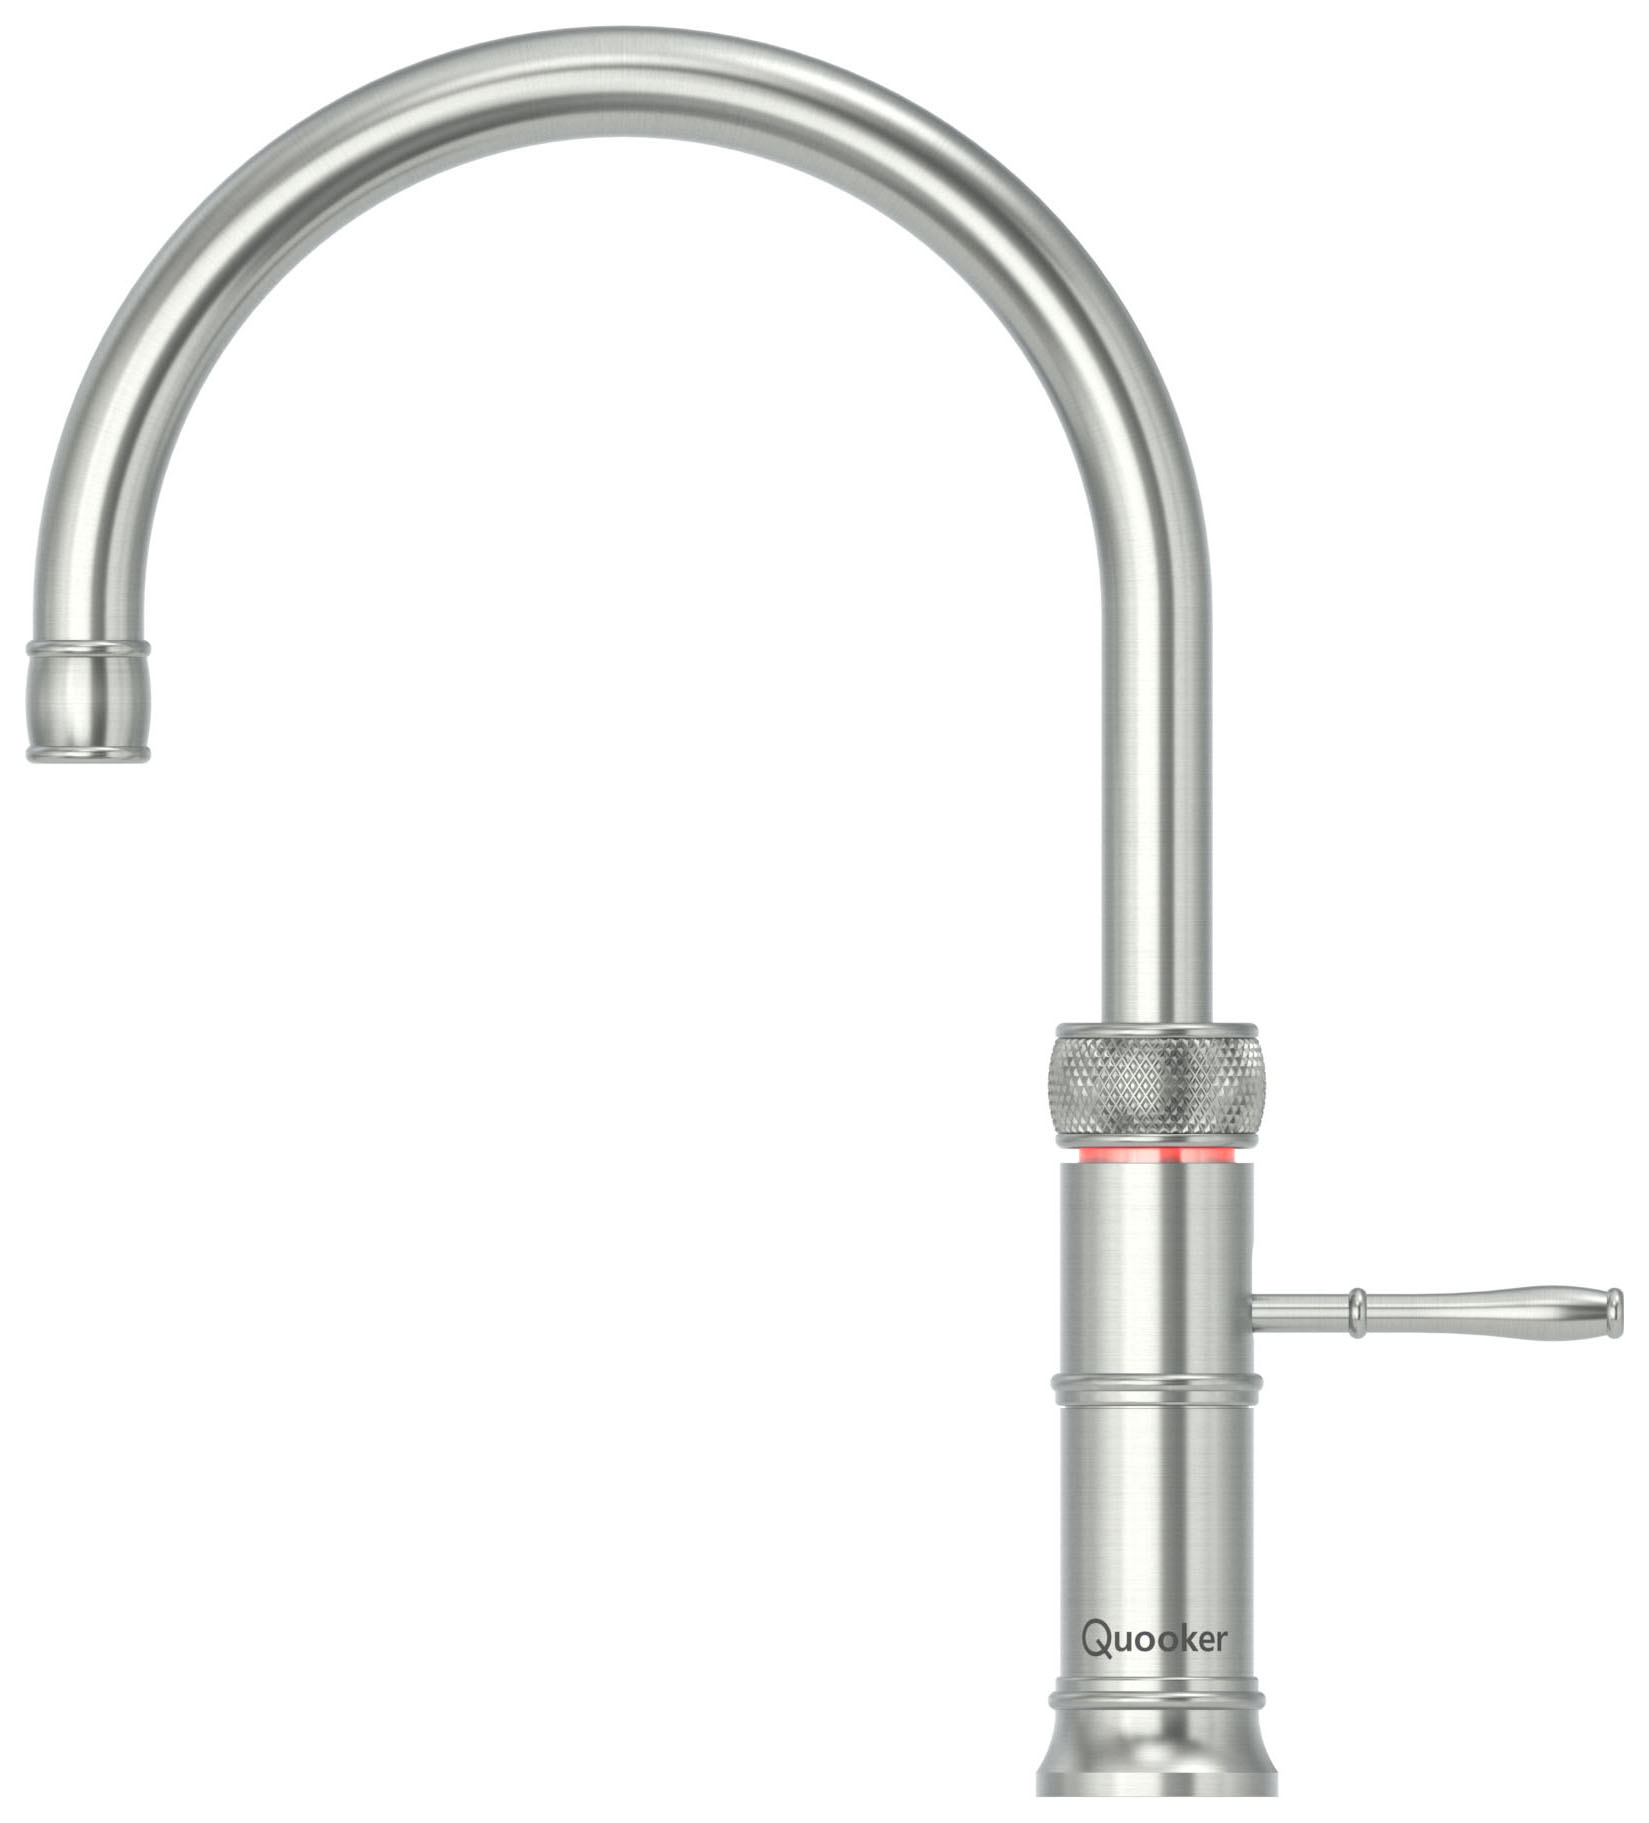 Quooker PRO3 Classic Fusion Round Kitchen Tap - Stainless Steel